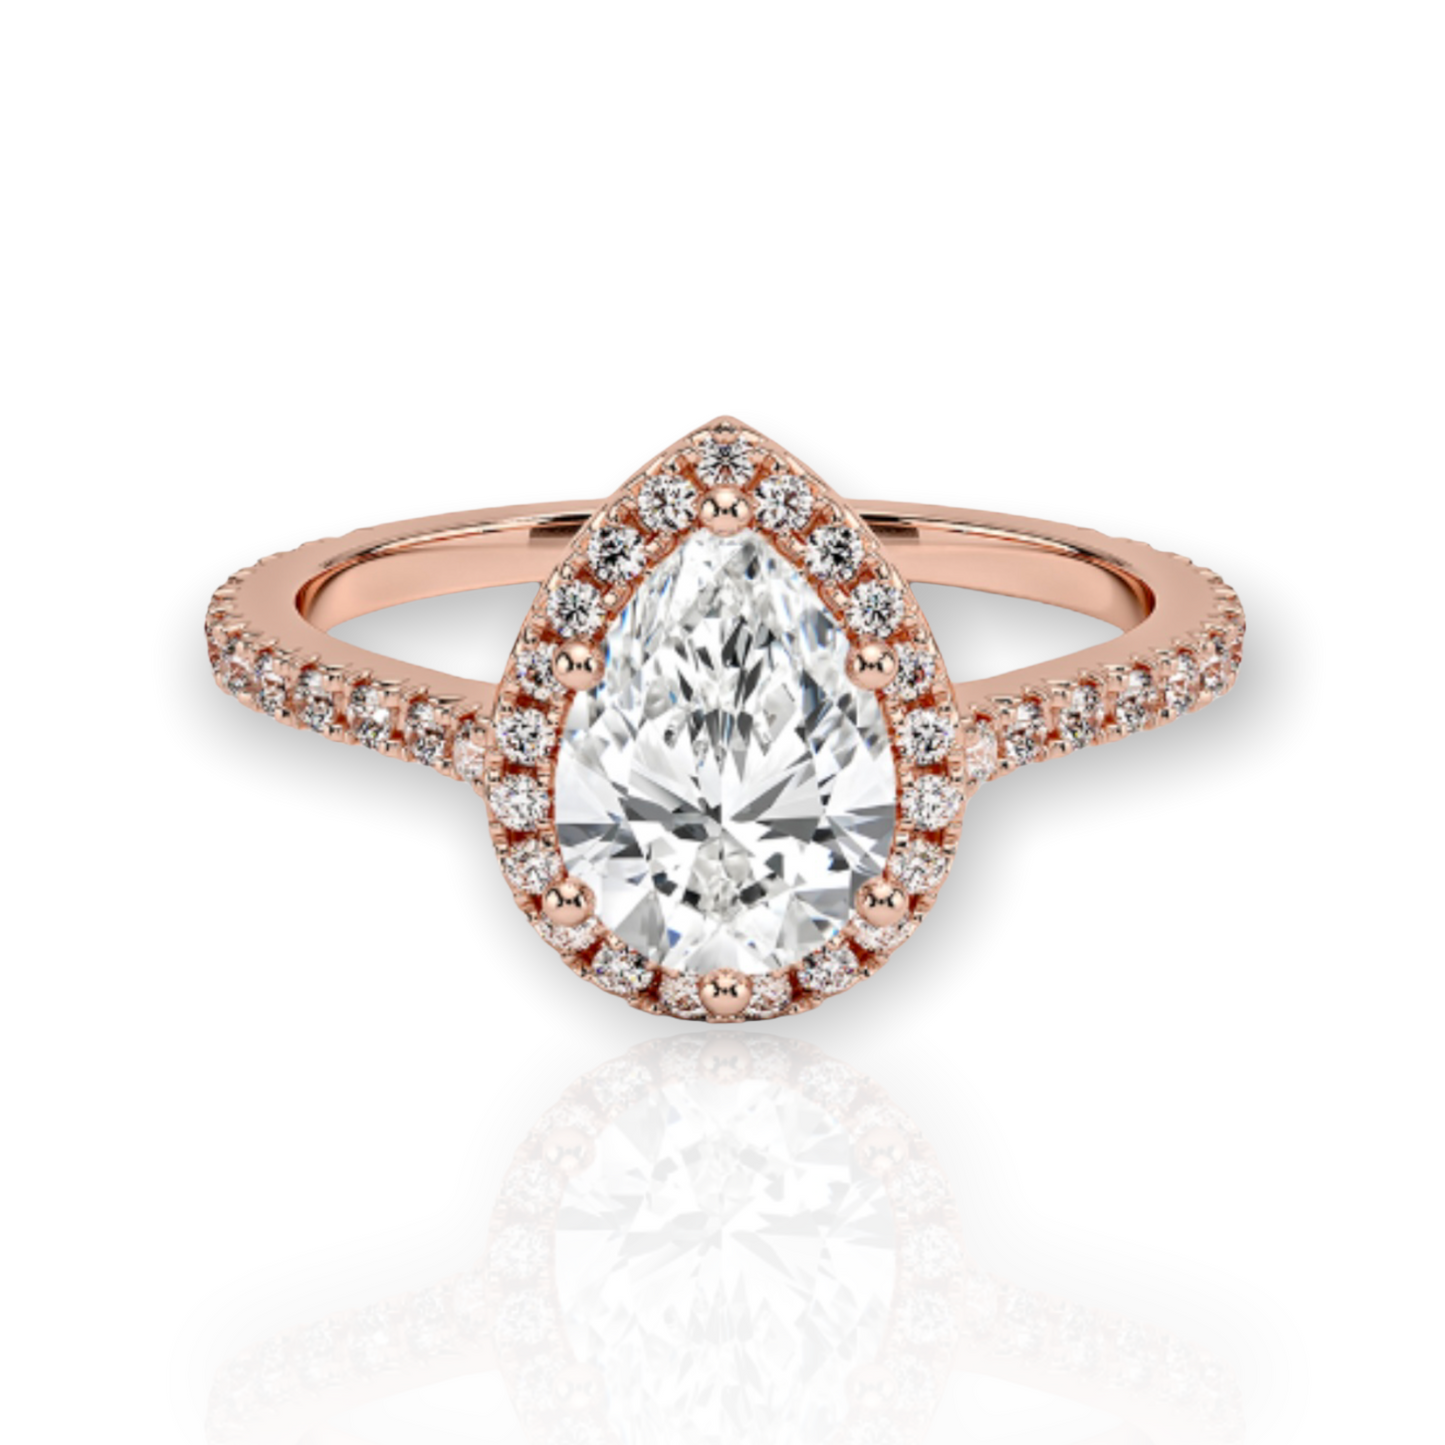 Pear Shape Diamond Engagement Ring with Halo